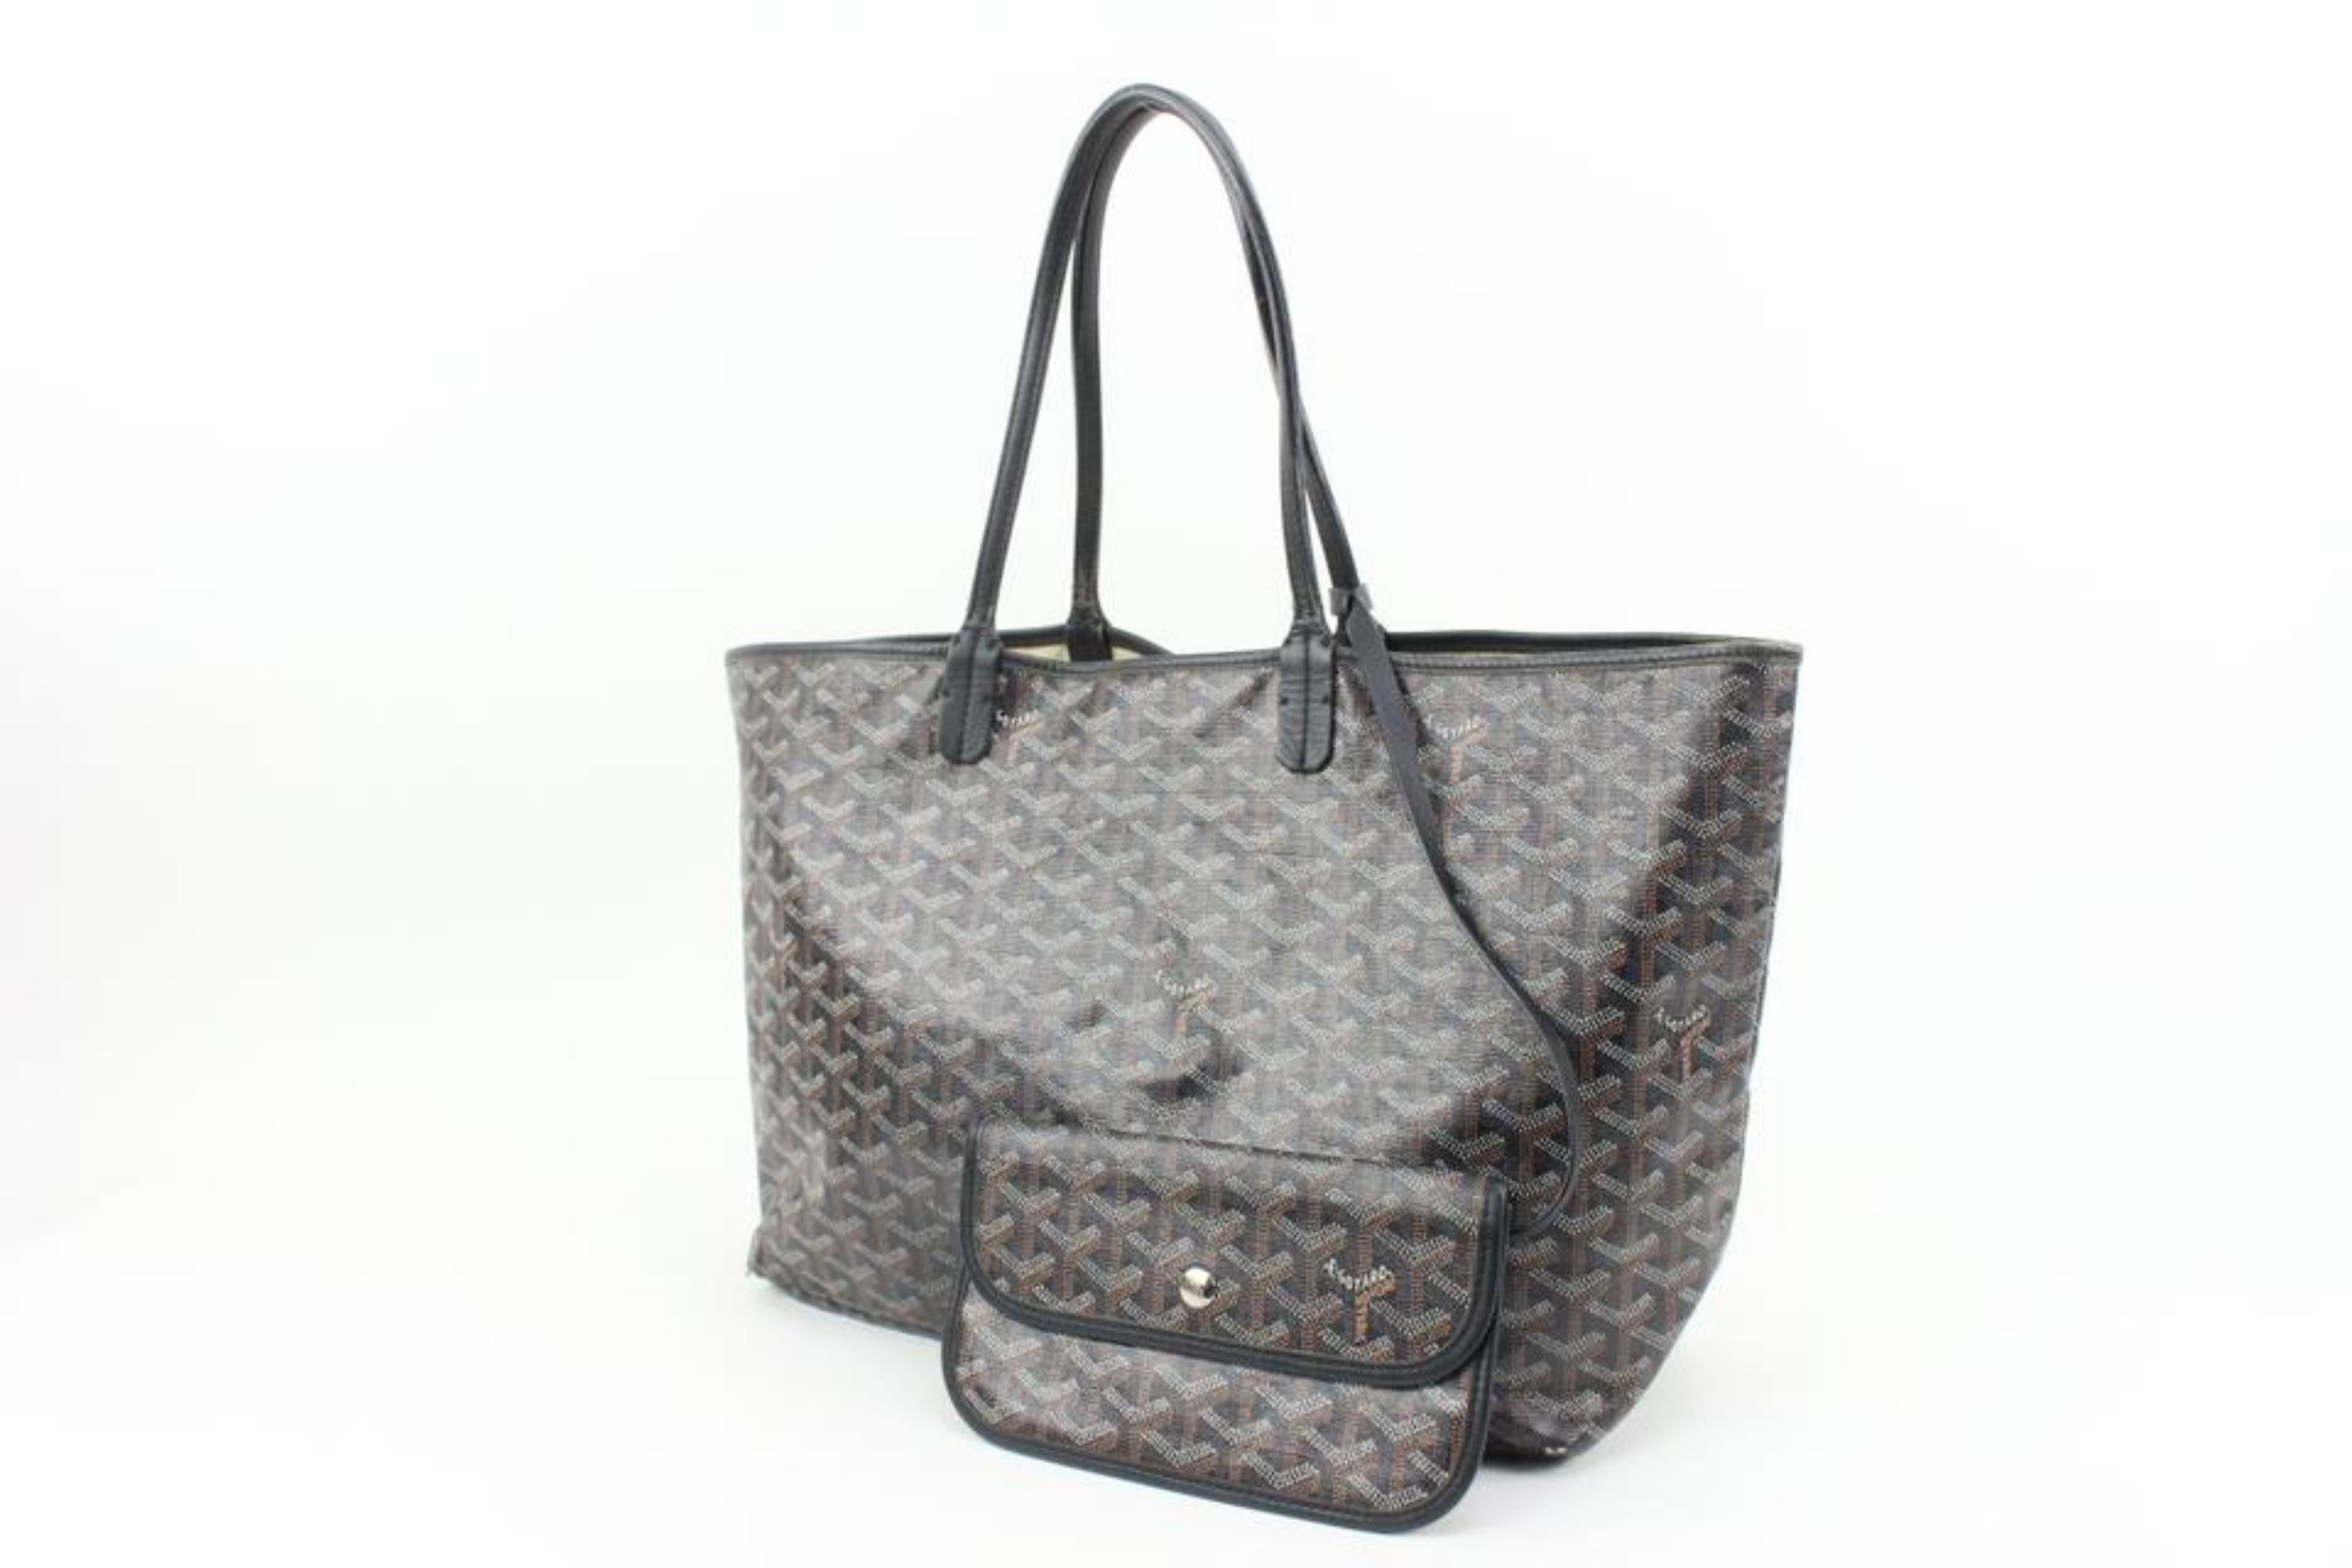 Goyard Black Chevron St Louis PM Tote Bag with Pouch 76gy39s
Date Code/Serial Number: AAS020107
Made In: France
Measurements: Length:  18.5